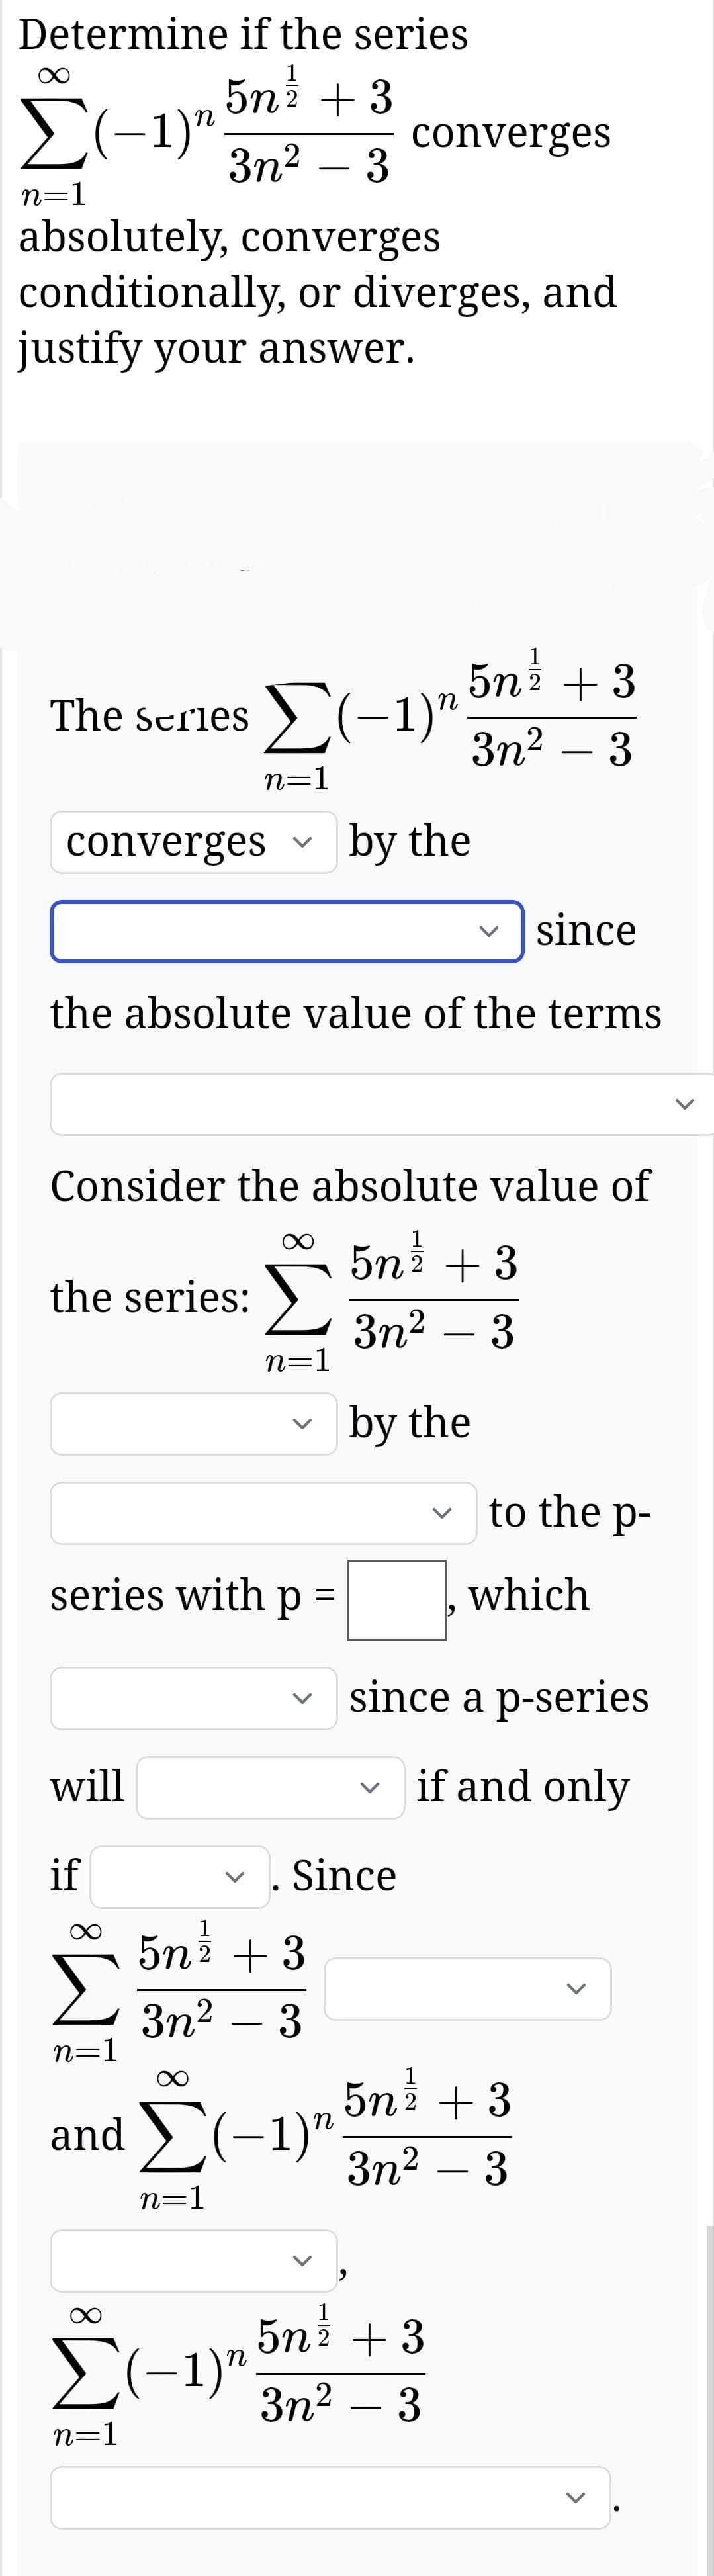 Determine if the series
Σ(-1)"
5n 1/2 + 3
converges
3n² - 3
n=1
absolutely, converges
conditionally, or diverges, and
justify your answer.
The Series ✗(-1)"
5n /
2 +3
3n² - 3
n=1
converges
by the
since
the absolute value of the terms
Consider the absolute value of
5N 1/1
2 + 3
the series:
3n² - 3
n=1
by the
to the p-
series with p =
which
since a p-series
will
く
if and only
if
n=1
5n³½ + 3
3m² - 3
and ☑
n=1
Since
(−1)n
5n1/2 + 3
3n² - 3
Σ(-1)"
n=1
5n 1/2 + 3
3n² - 3
>
>